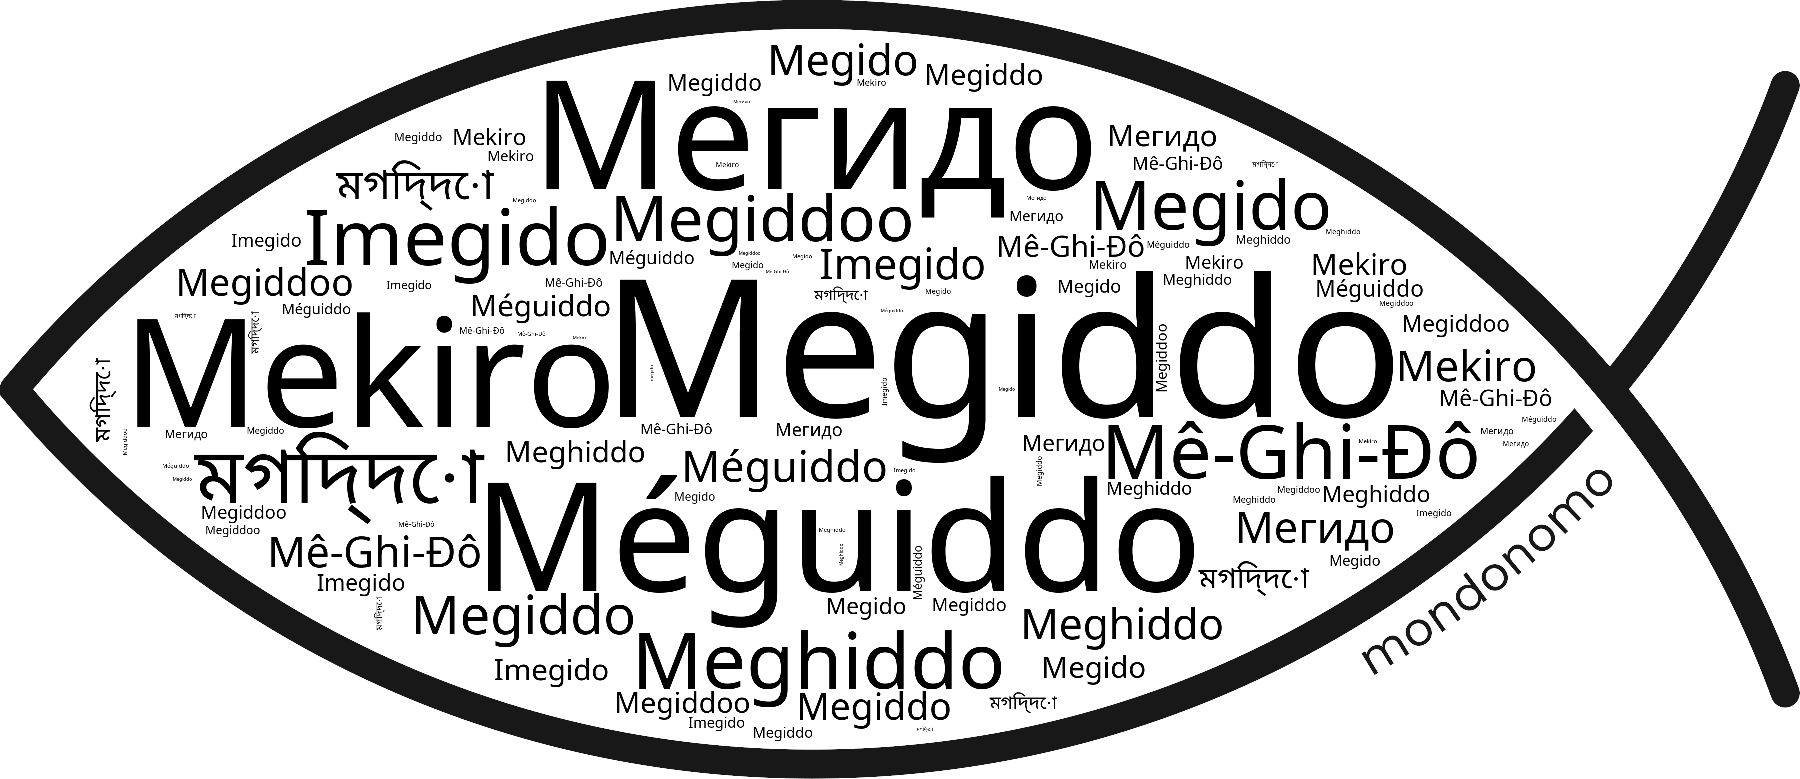 Name Megiddo in the world's Bibles